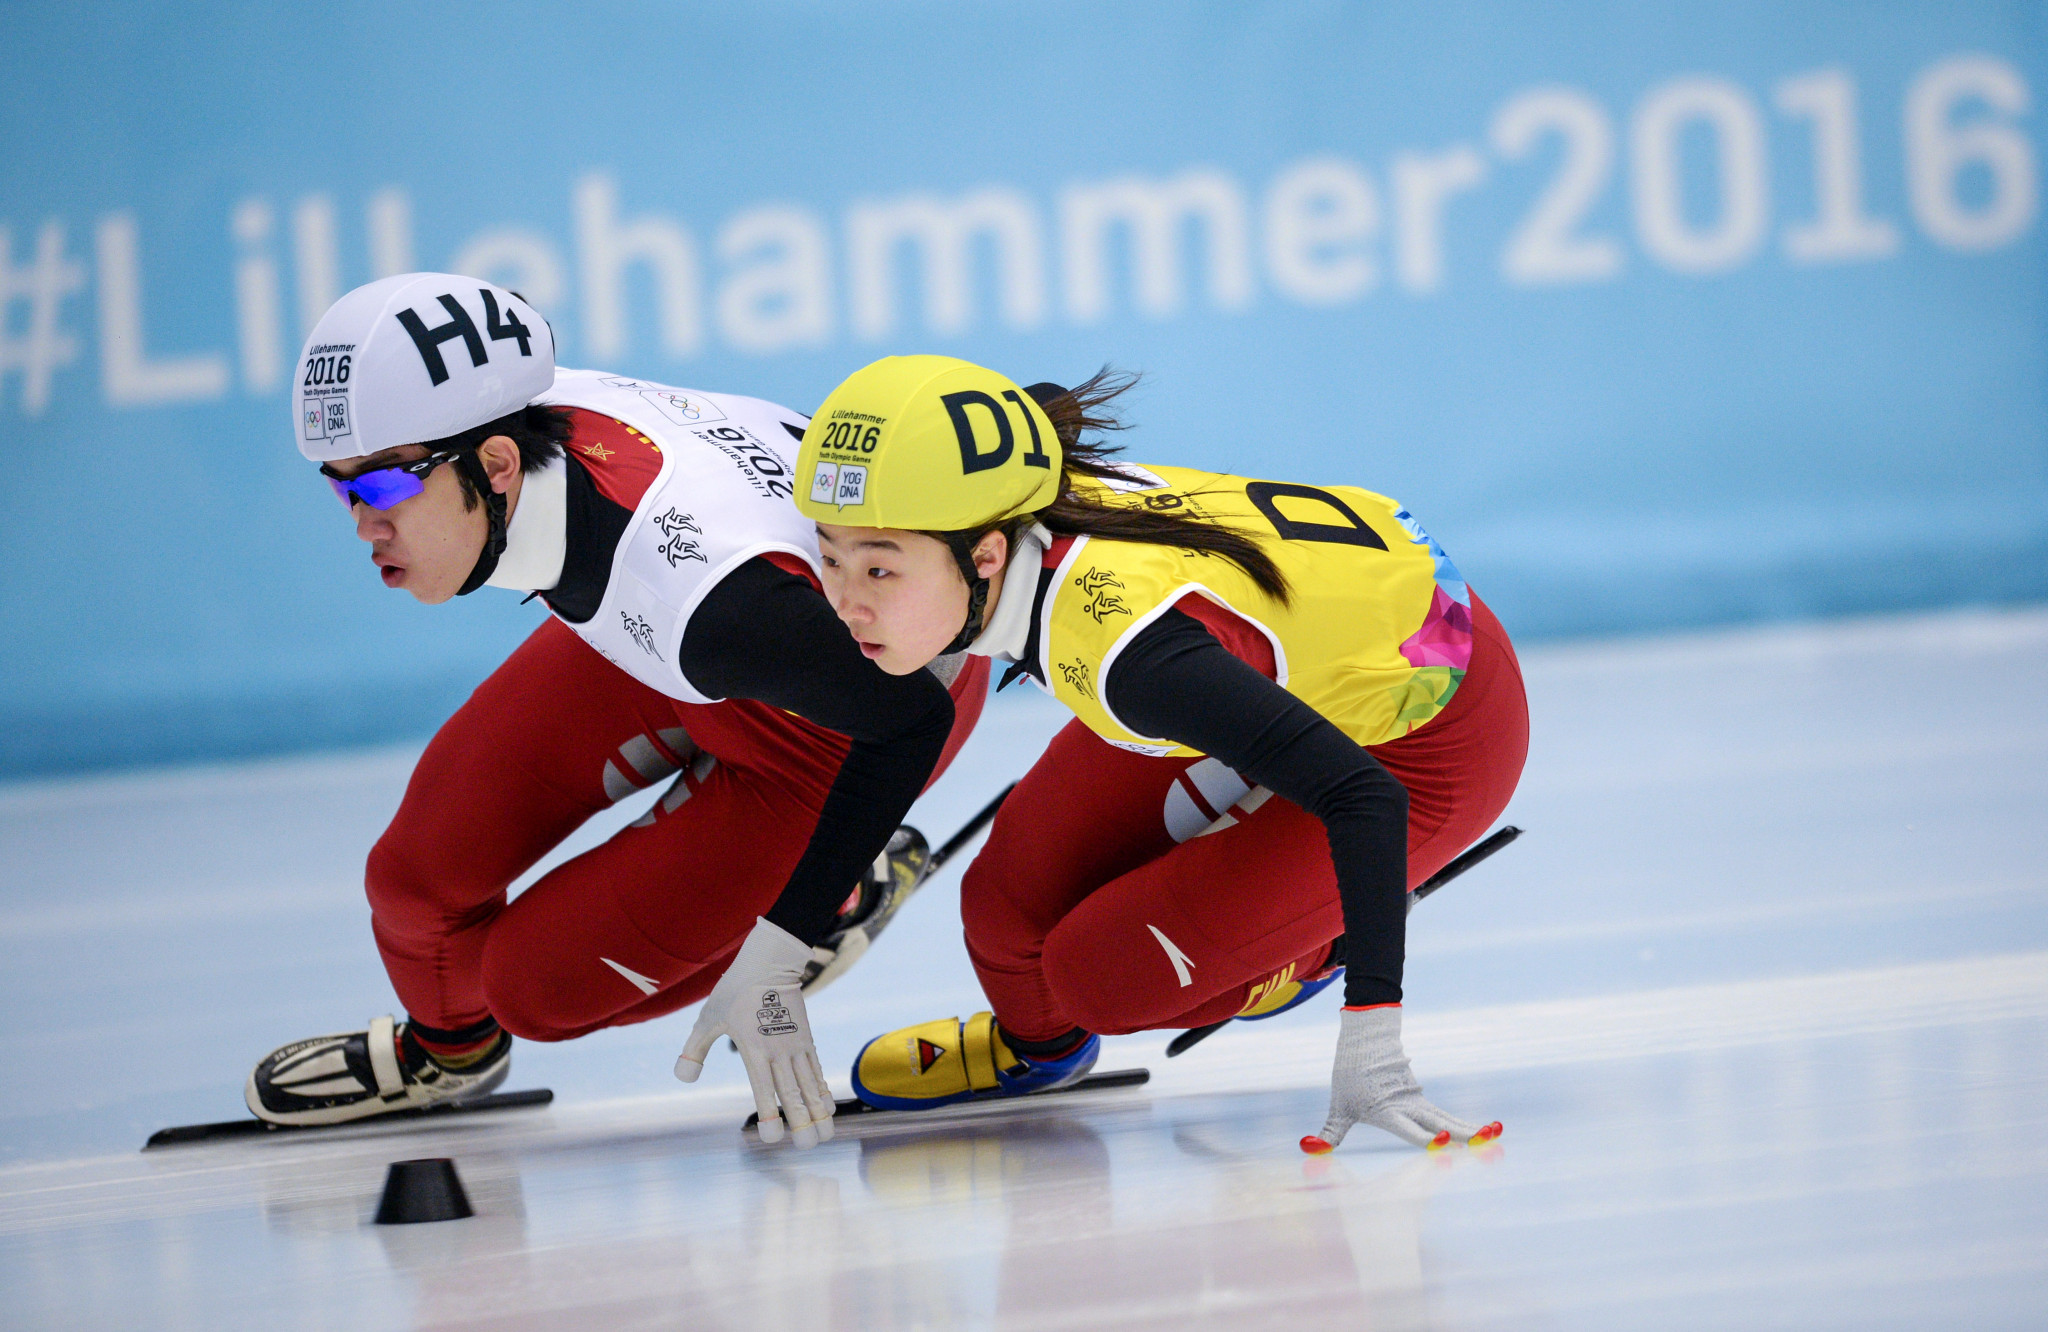 Mixed relay is a new format for short track ©Getty Images